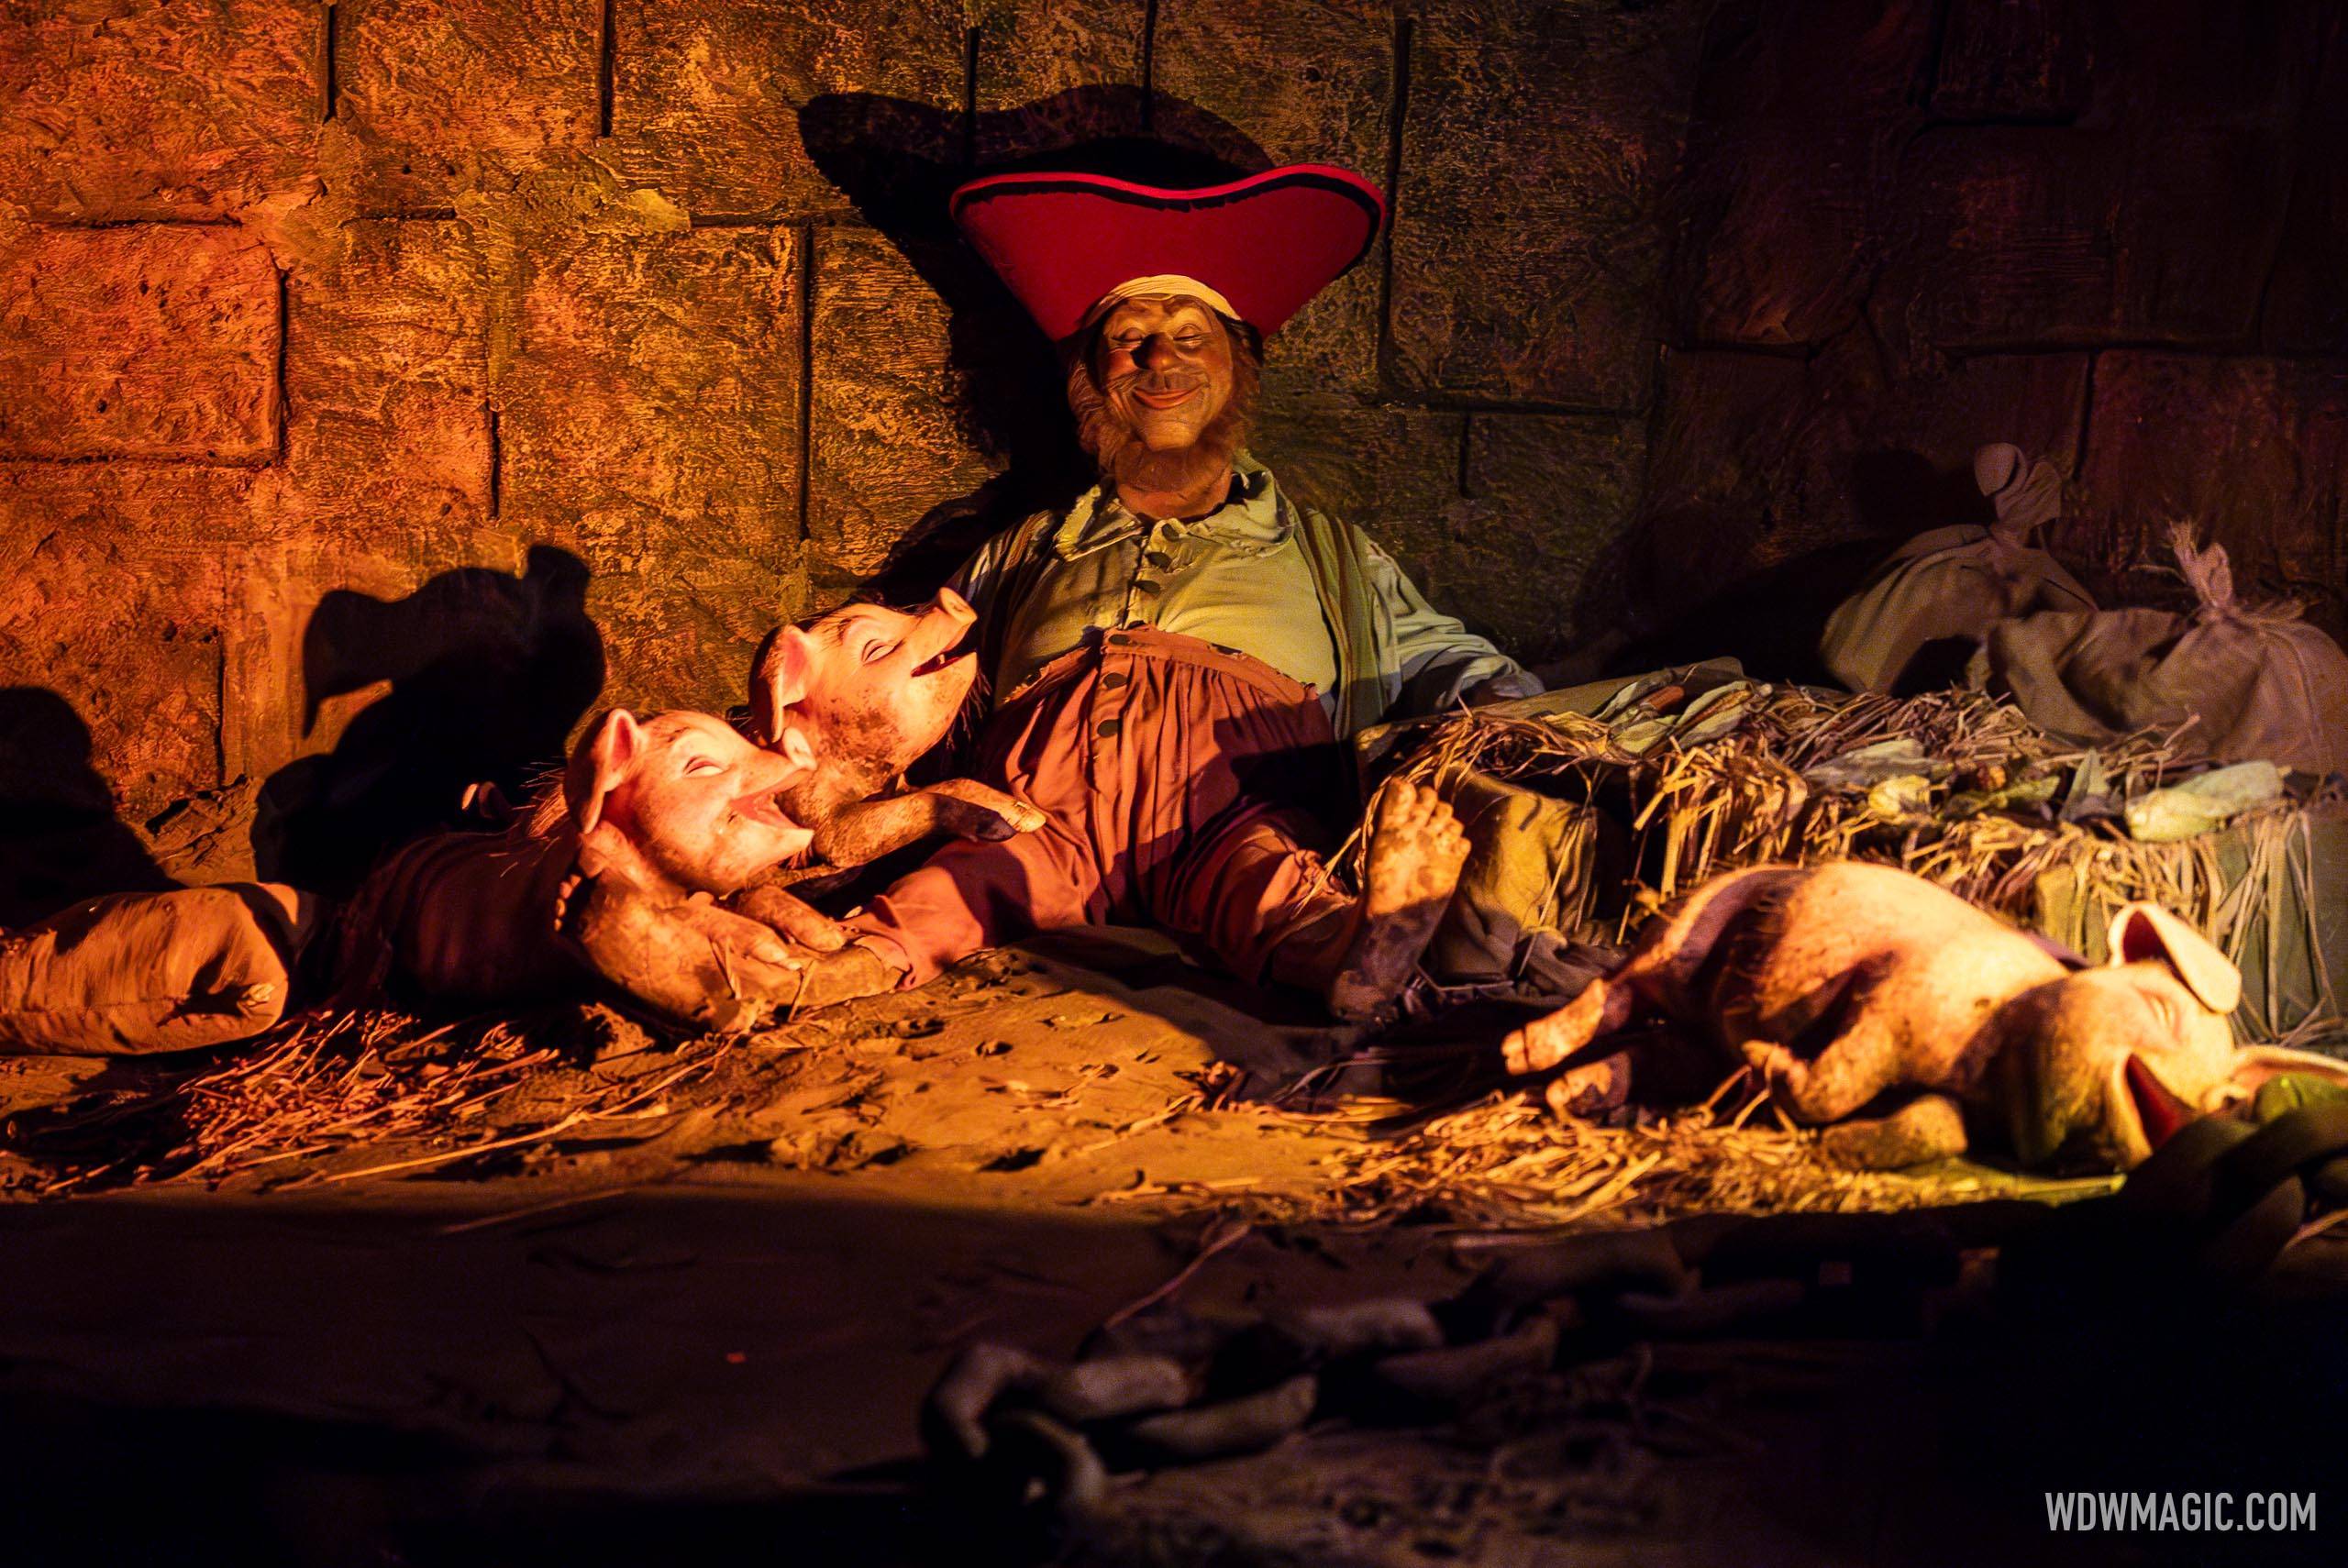 Pirates of the Caribbean closing for major refurbishment from May